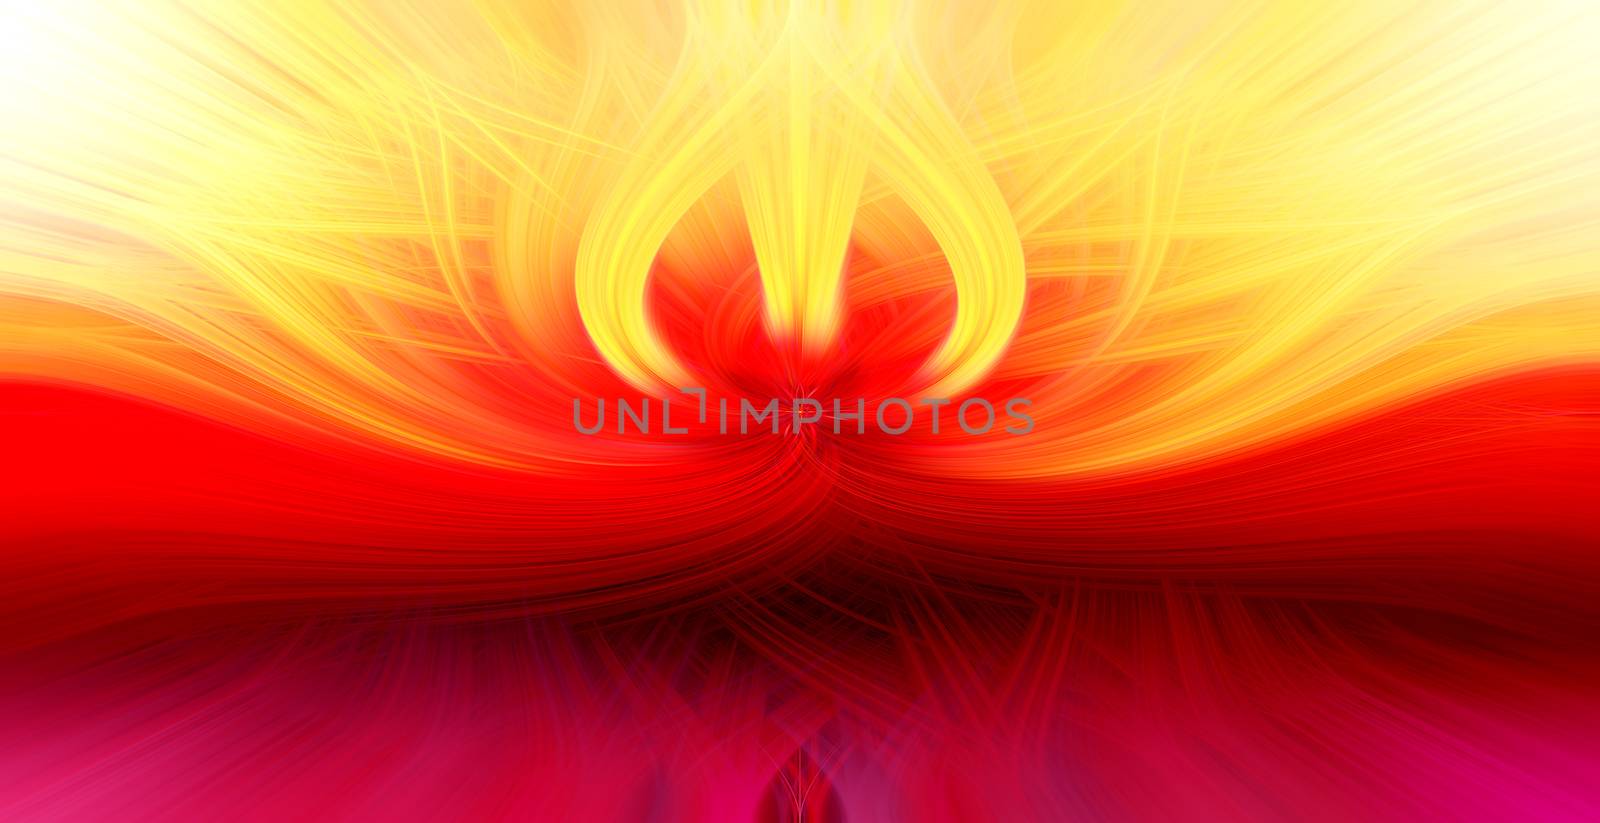 Abstract intertwined fibers, shape of flame by DamantisZ